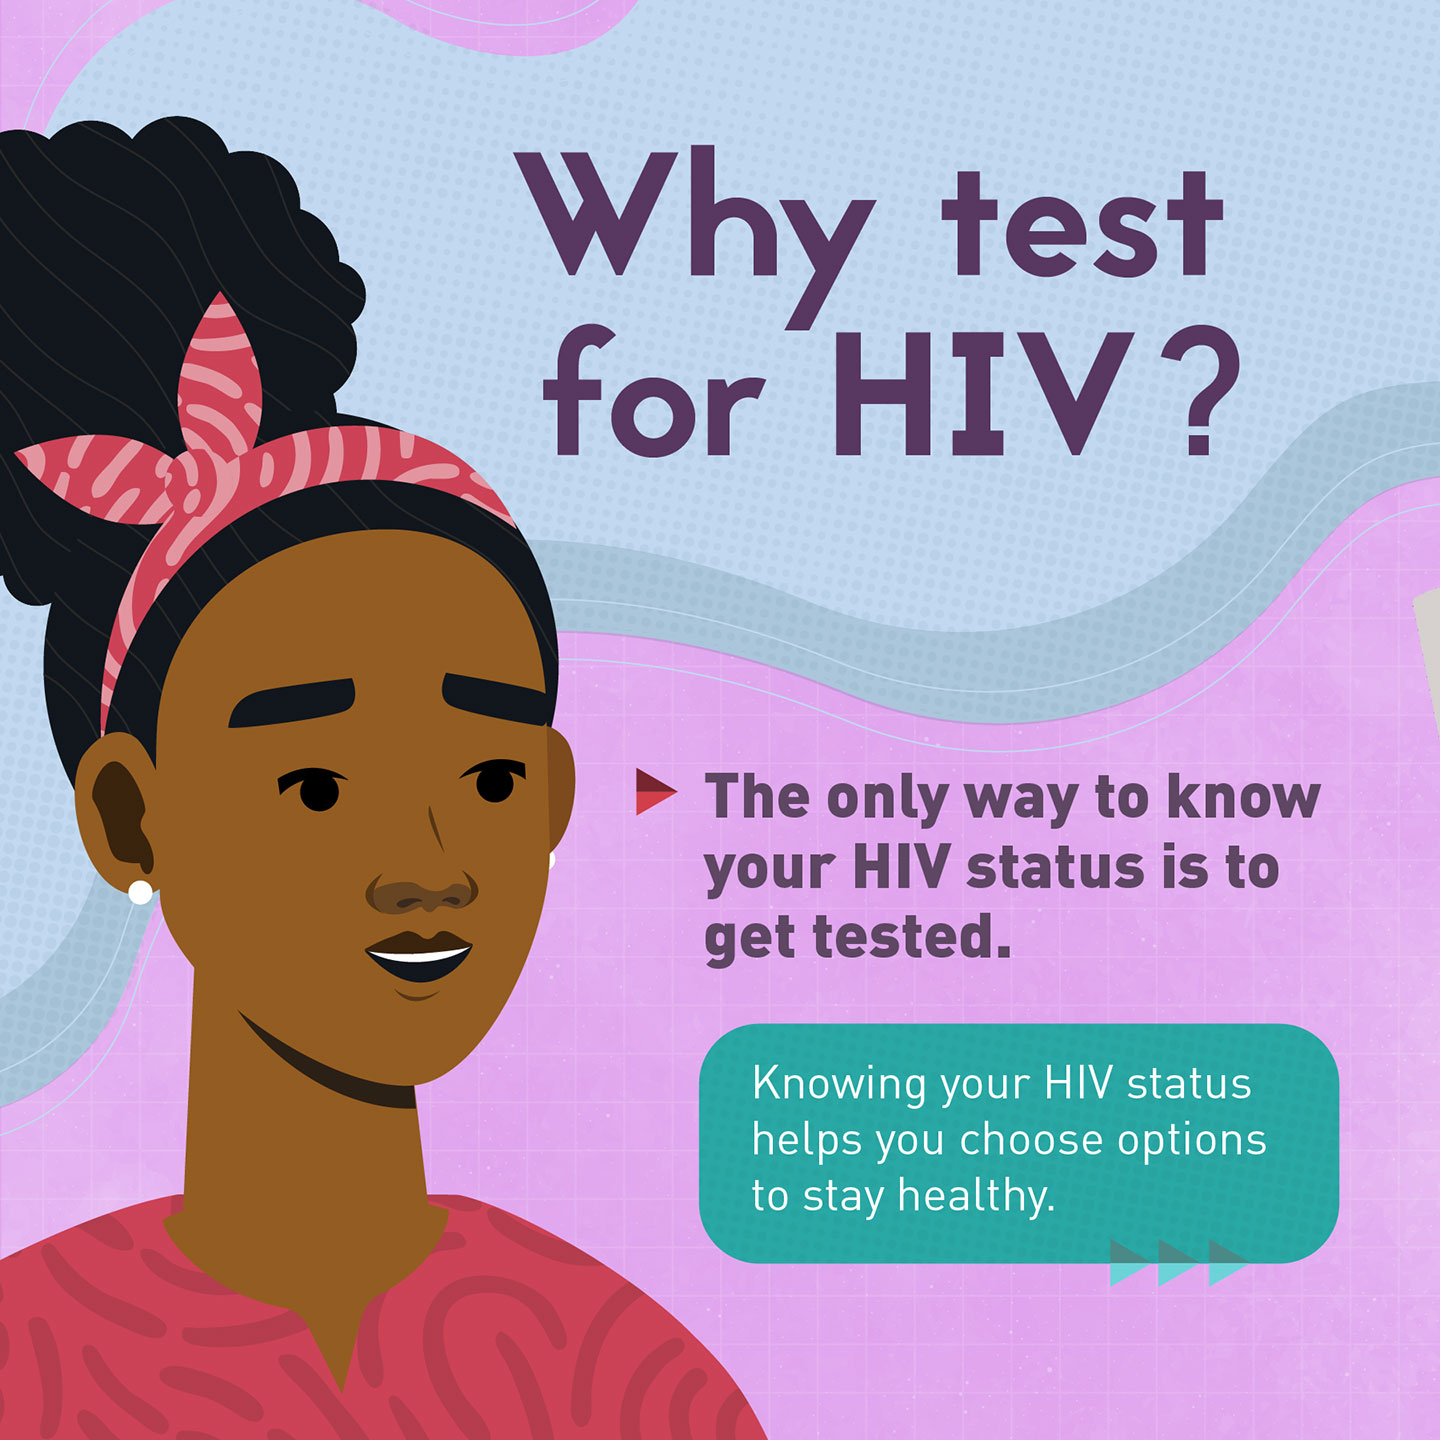 Illustrated young woman: Why test for HIV? The only way to know your HIV status is to get tested. Knowing your HIV status helps you choose options to stay healthy.